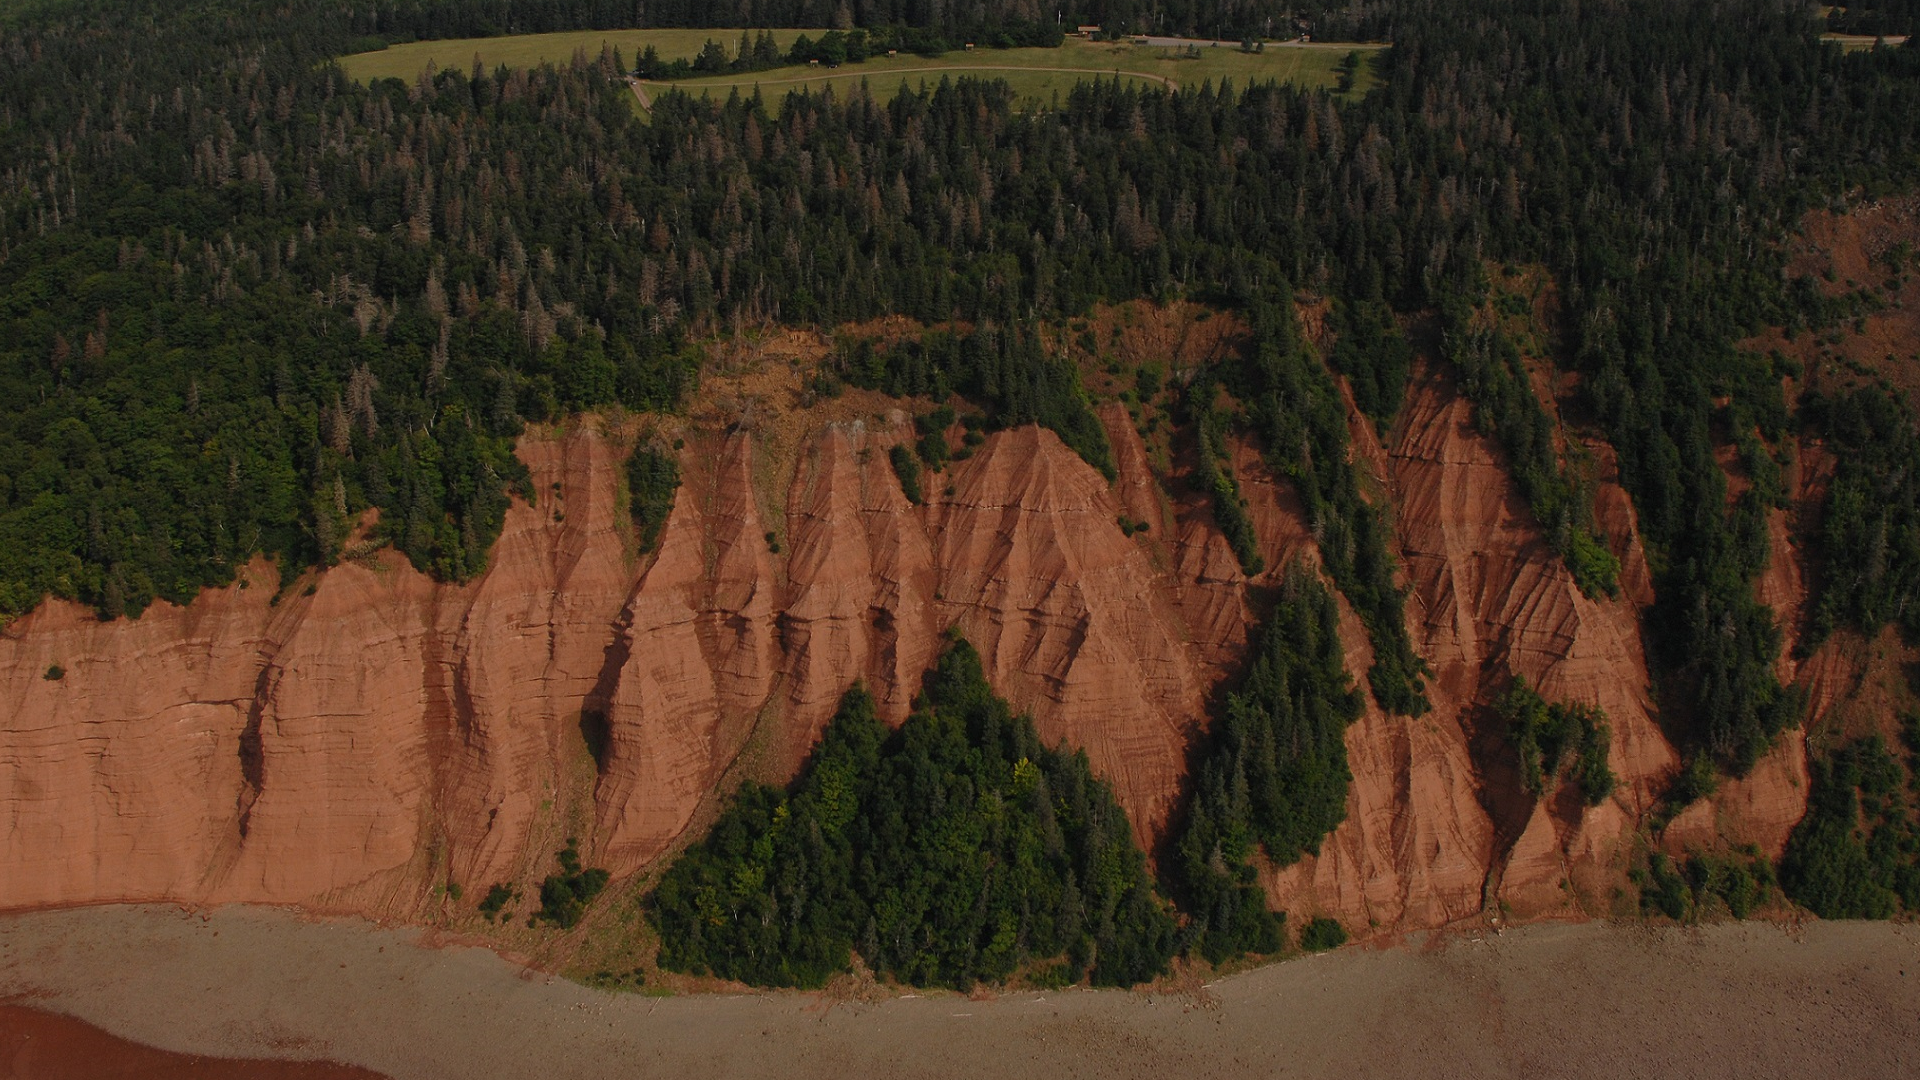 Bay of Fundy, Canada » Geology Science